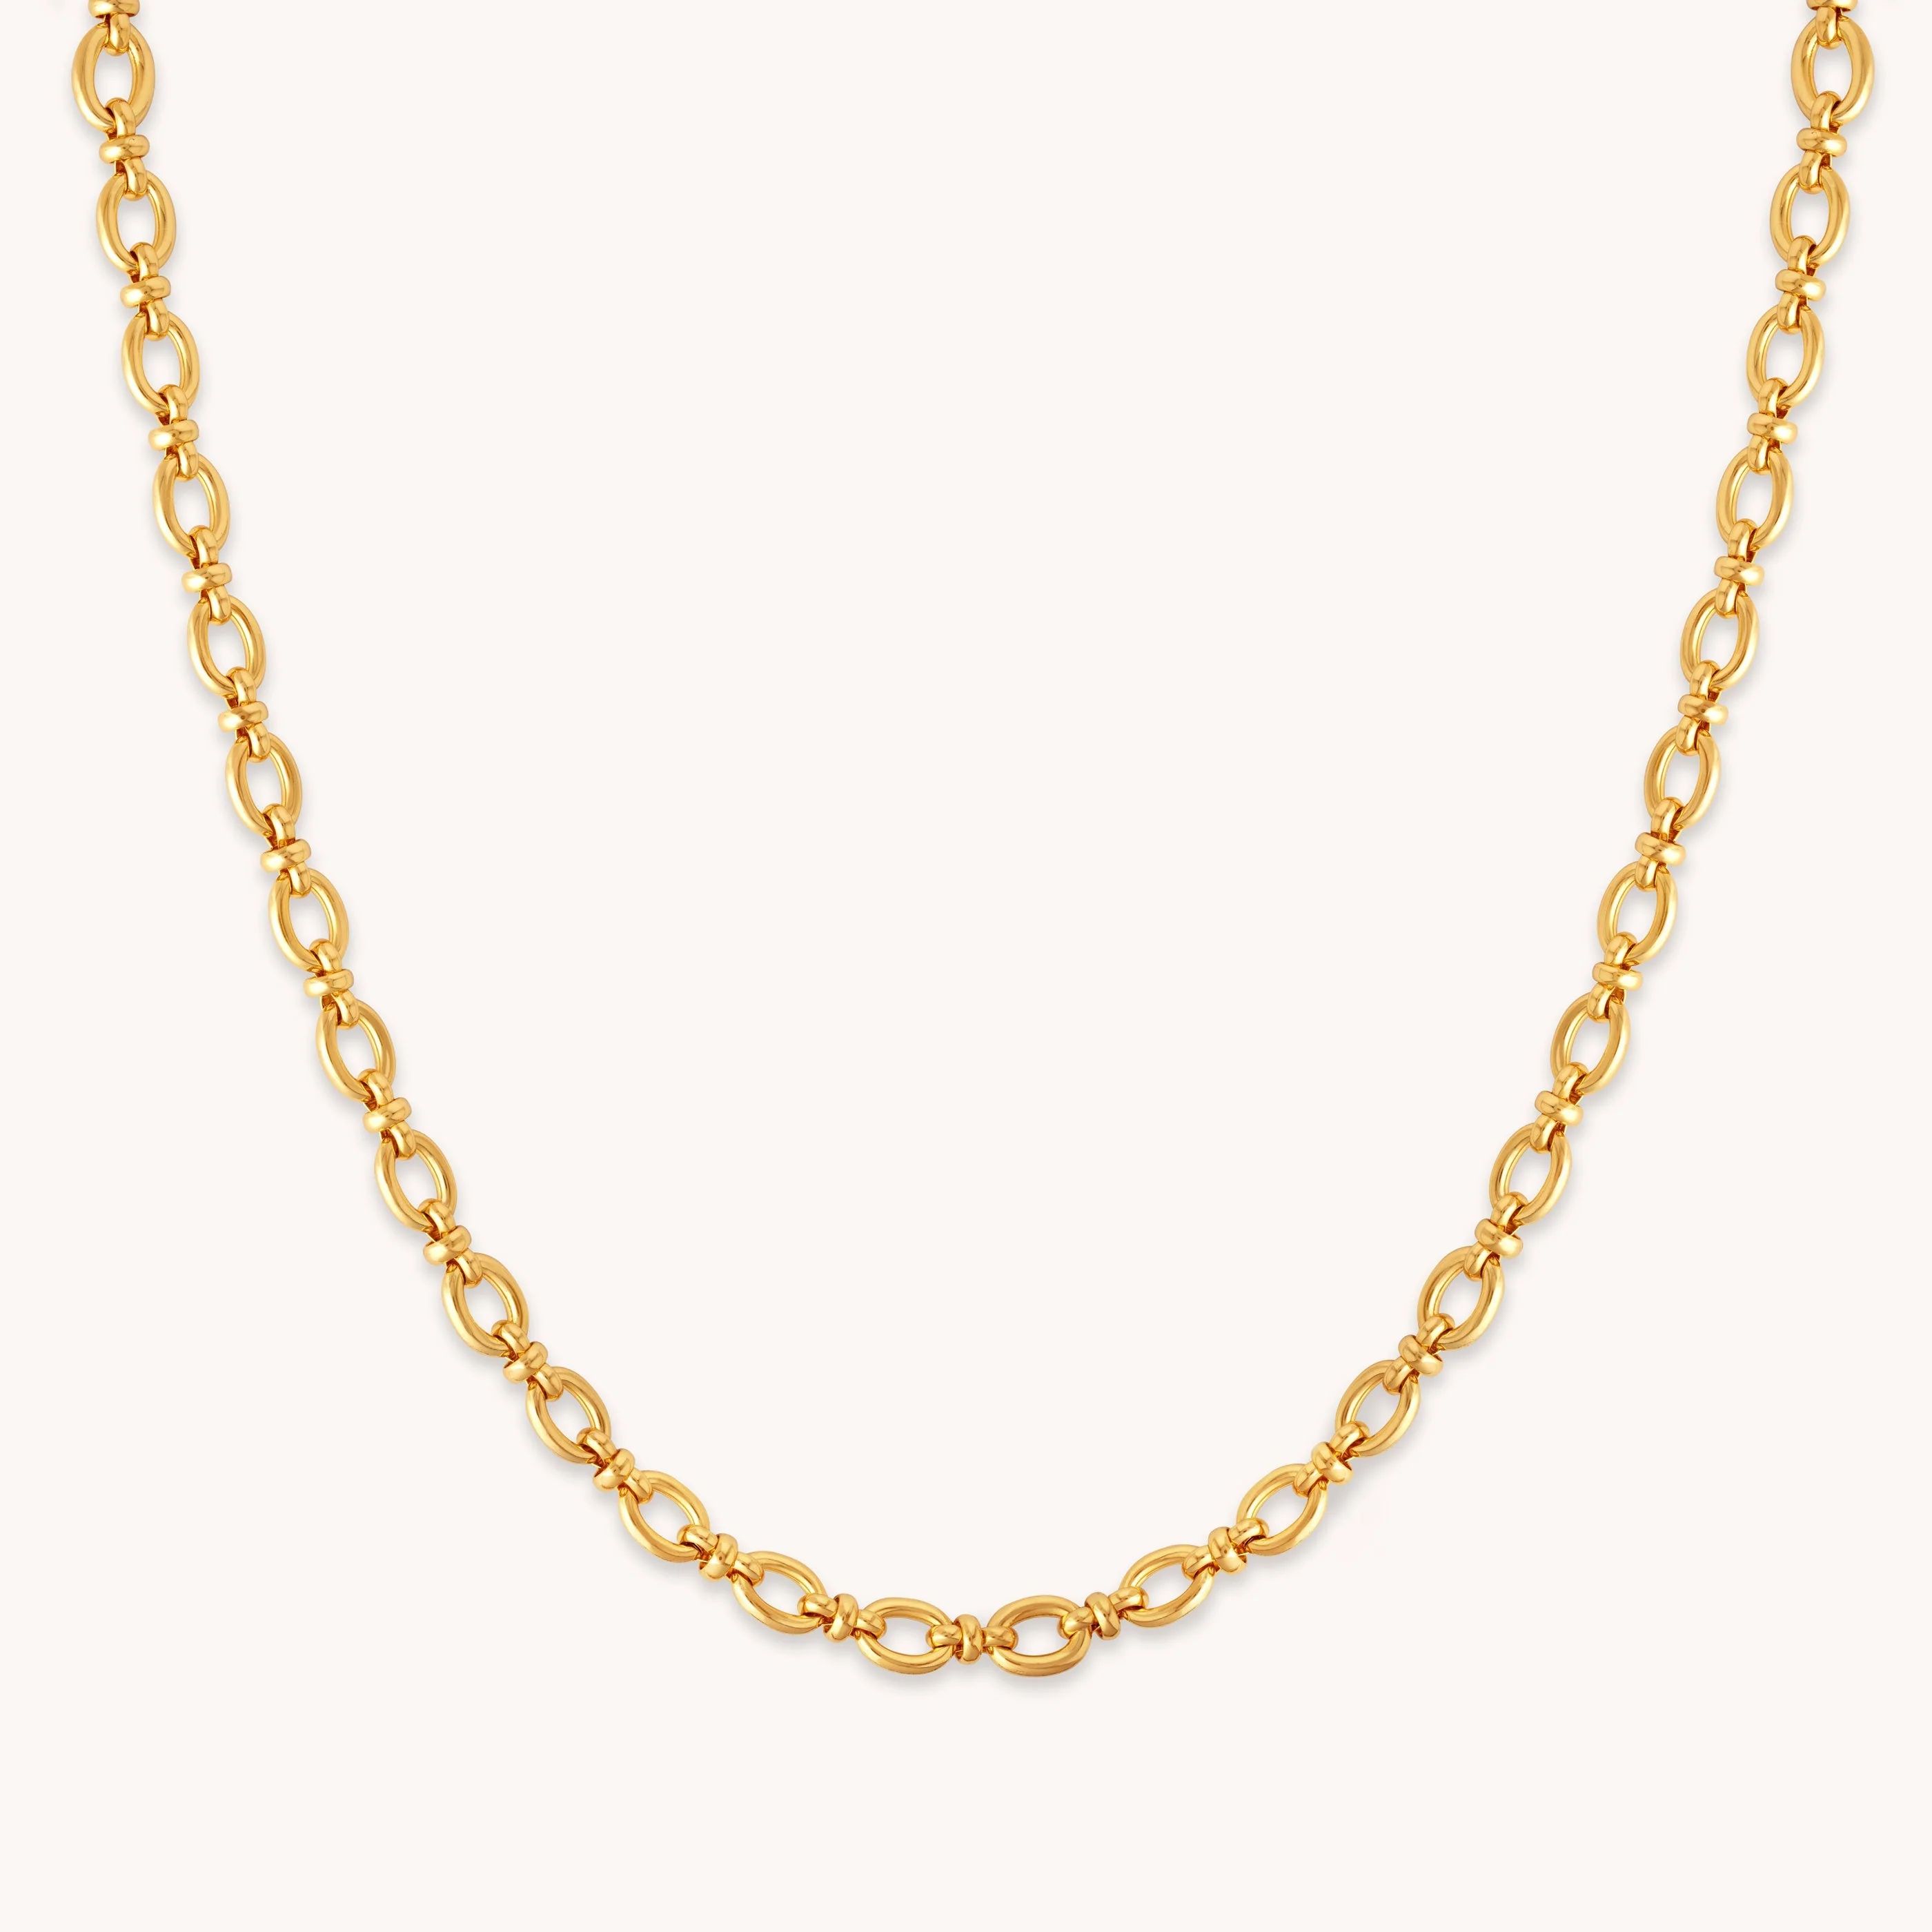 Gold Open Link Chain Necklace | Astrid & Miyu Necklaces | Astrid and Miyu